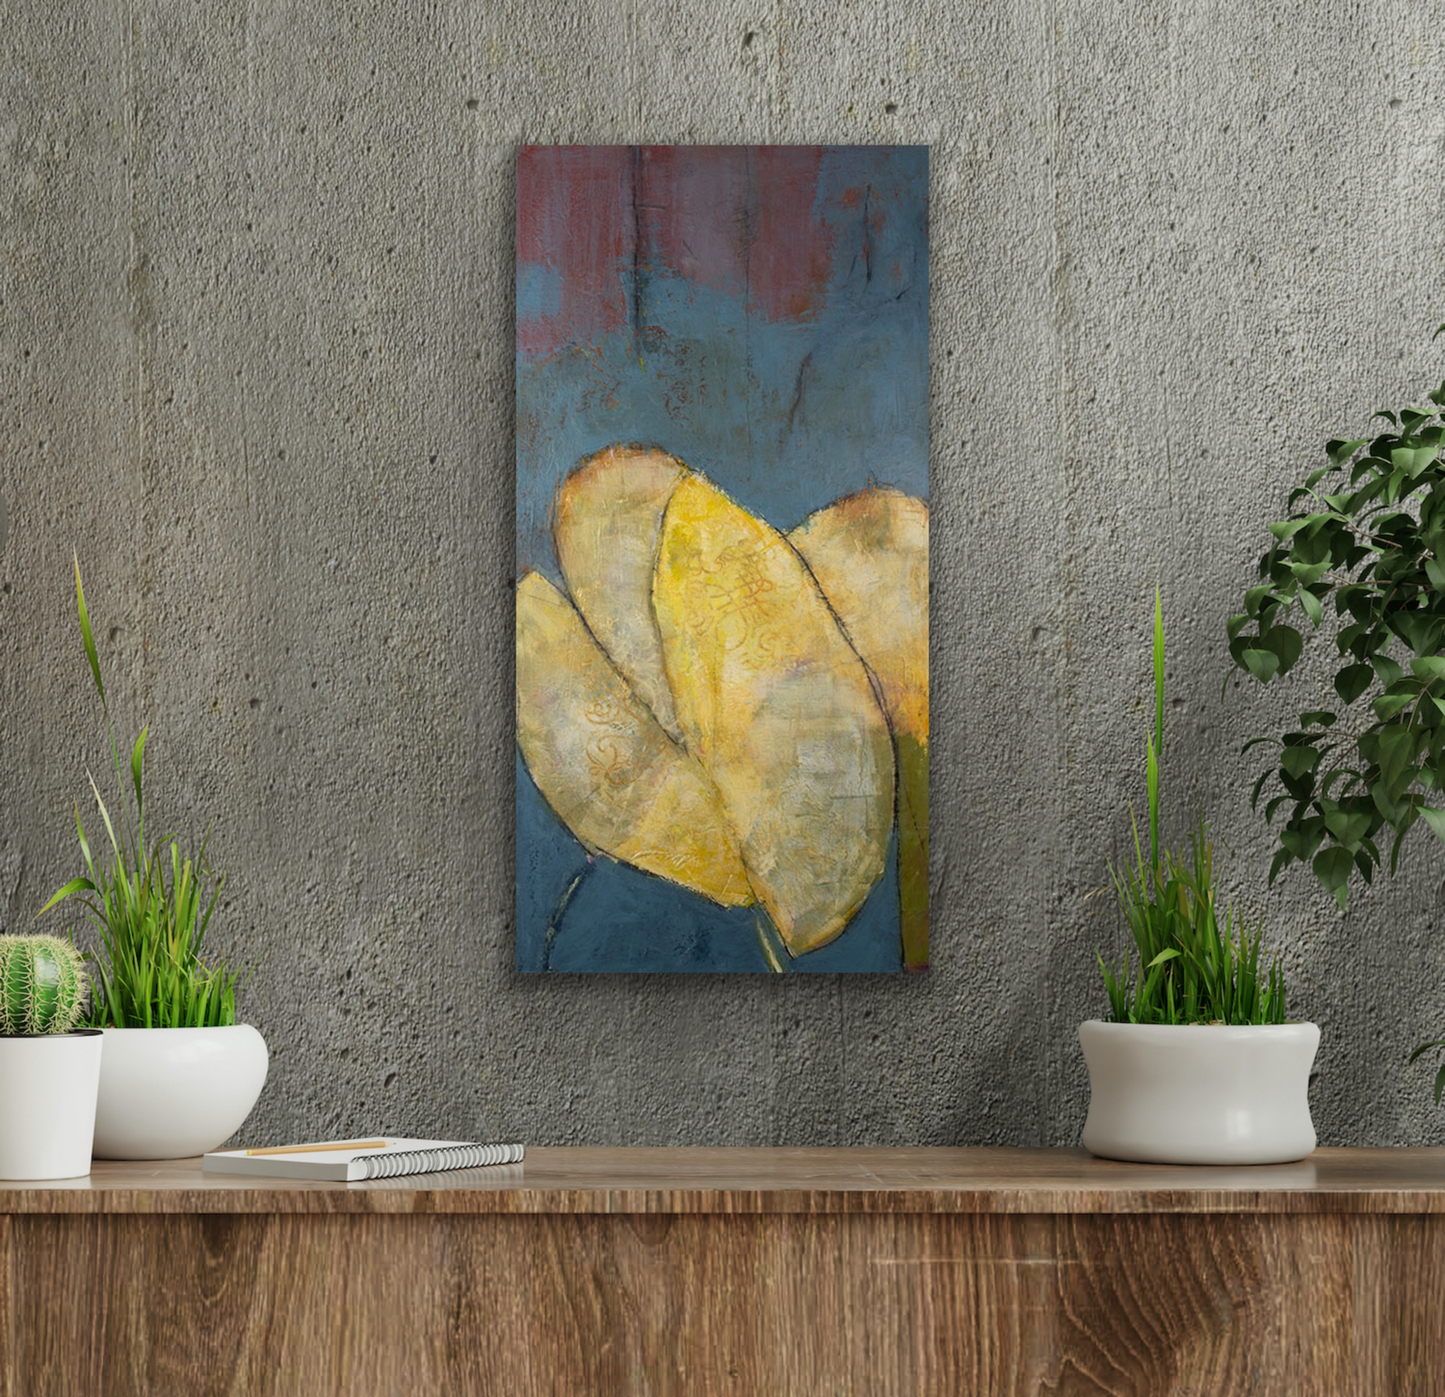 This abstract art piece comes in four sizes to fit your wall perfectly.